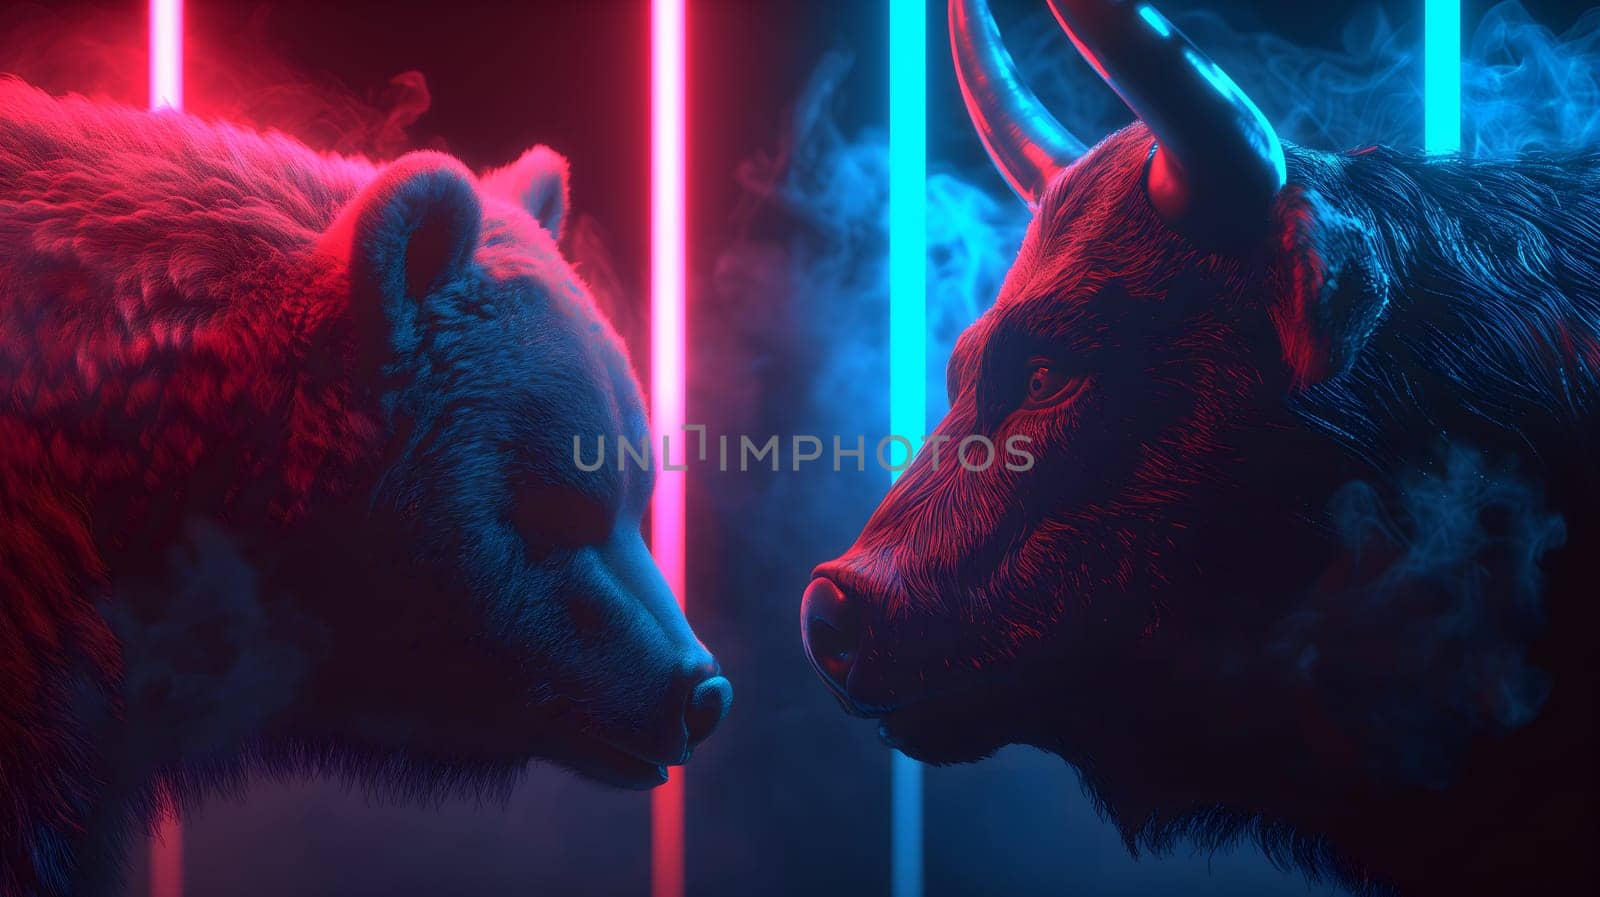 Bear and bull going head to head with pink and cyan neon lighting. Neural network generated image. Not based on any actual person or scene.